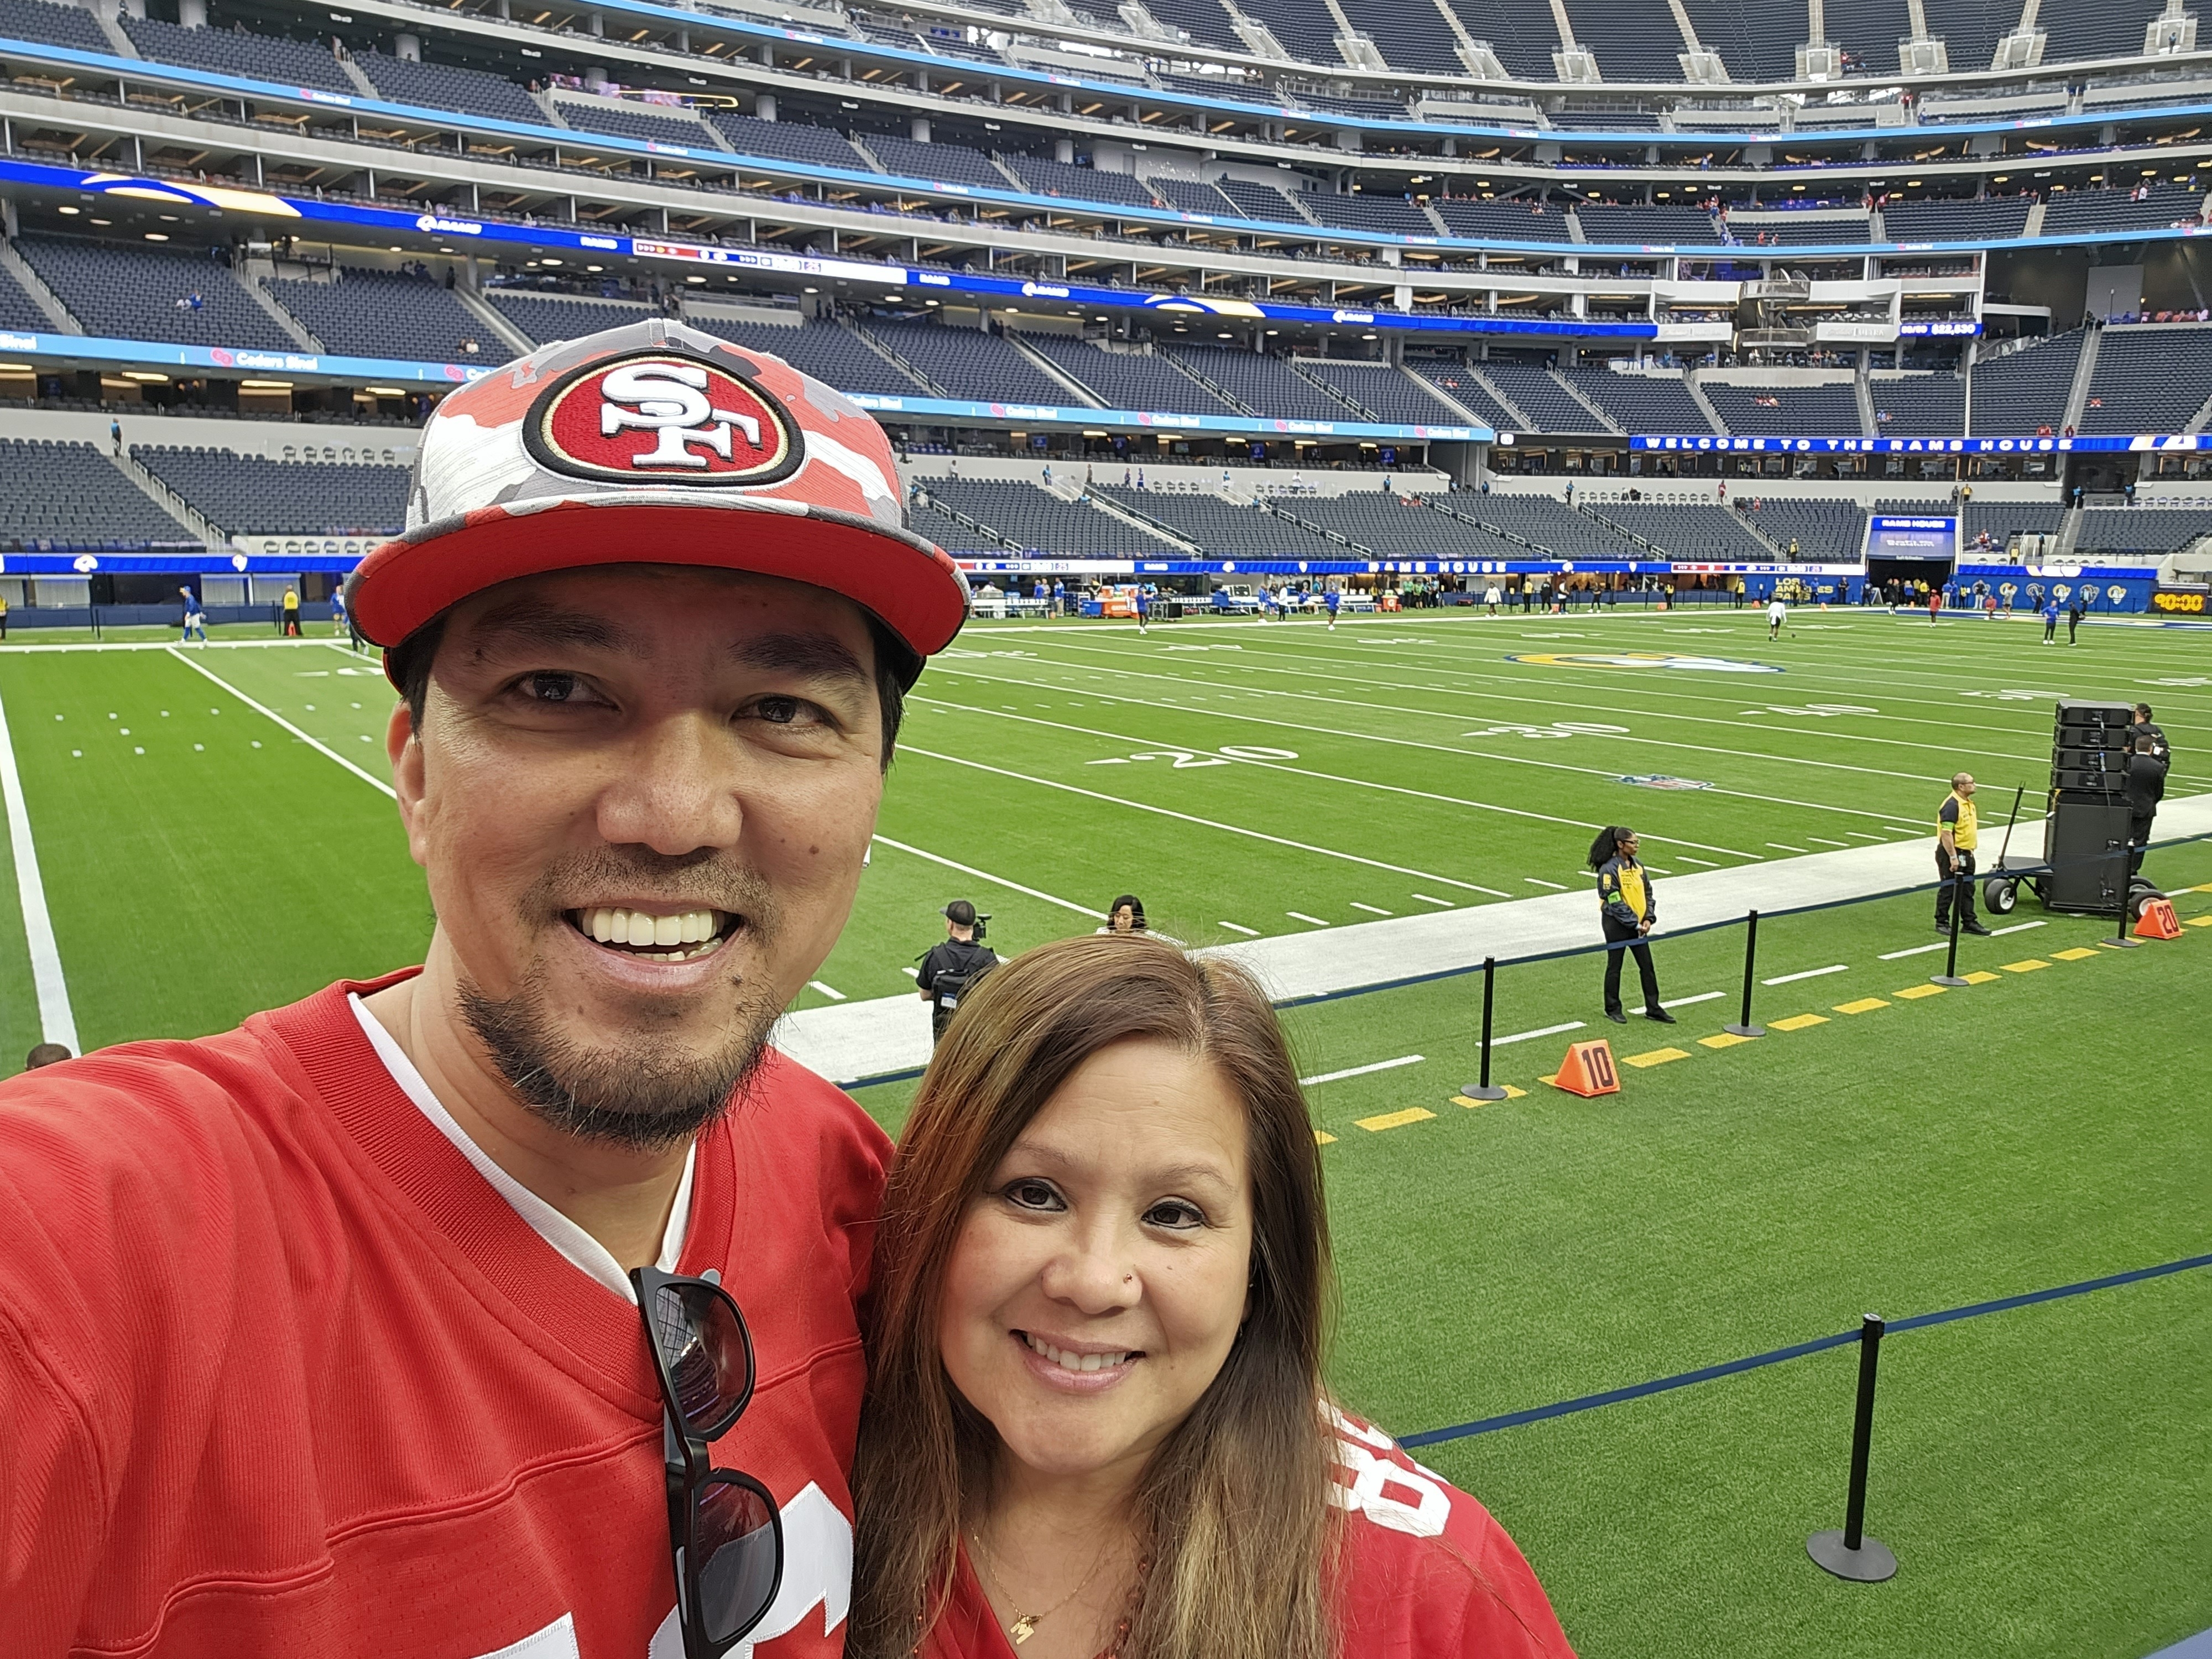 Los Angeles Rams vs. San Francisco 49ers: What fans are saying